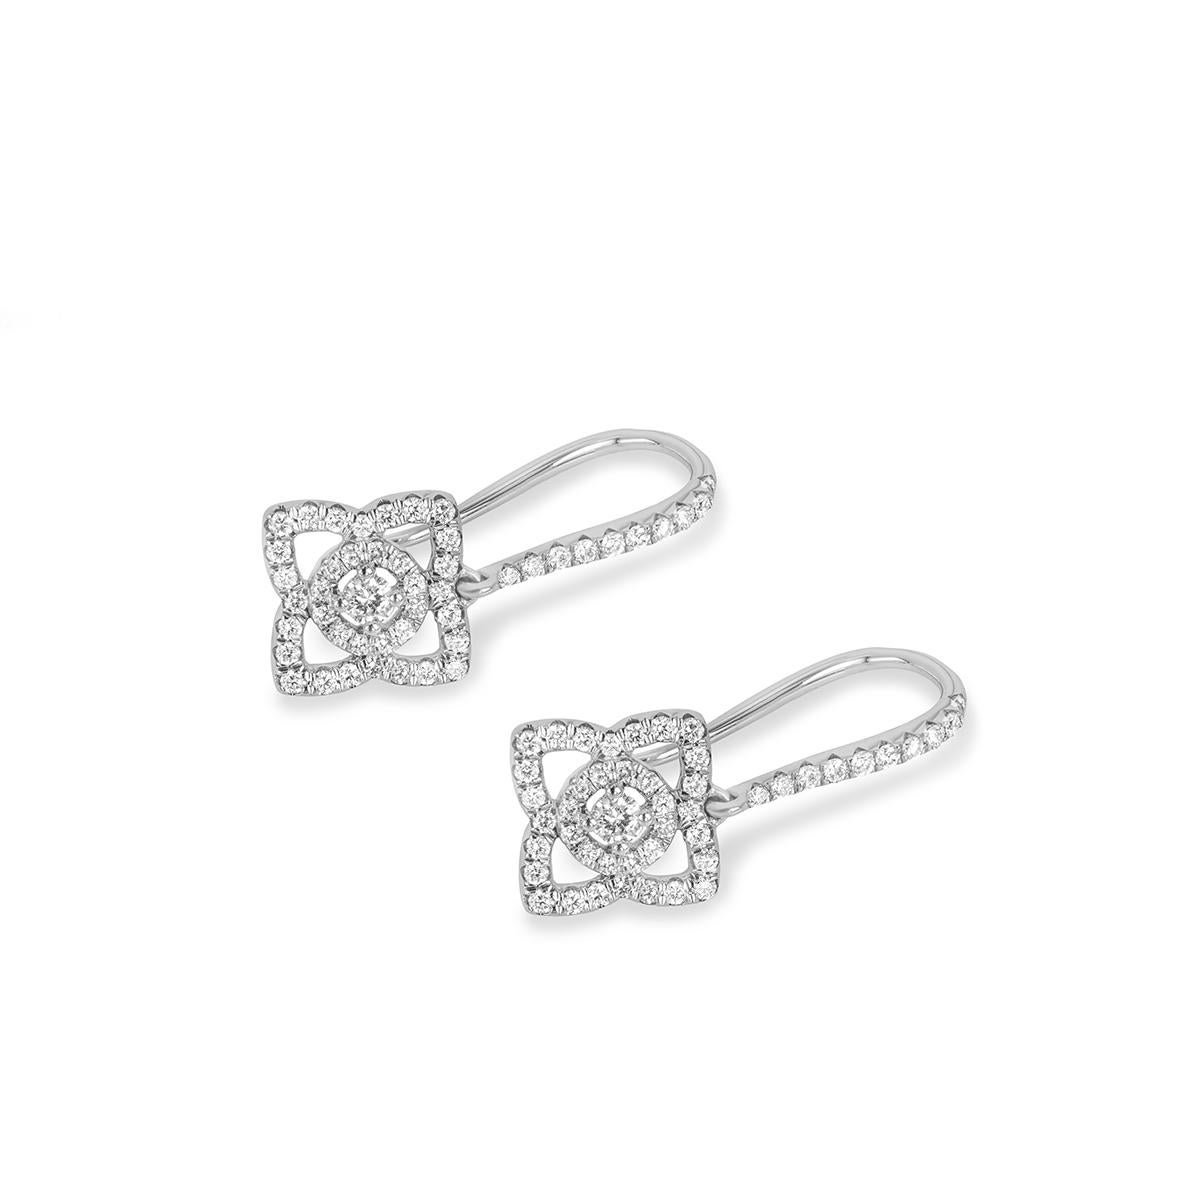 A sparkly pair of 18k white gold diamond earrings by De Beers from the Enchanted Lotus collection. The drop earrings feature a freely moving openwork lotus motif set below a micropave row of diamonds. The 94 round brilliant cut diamonds pave set